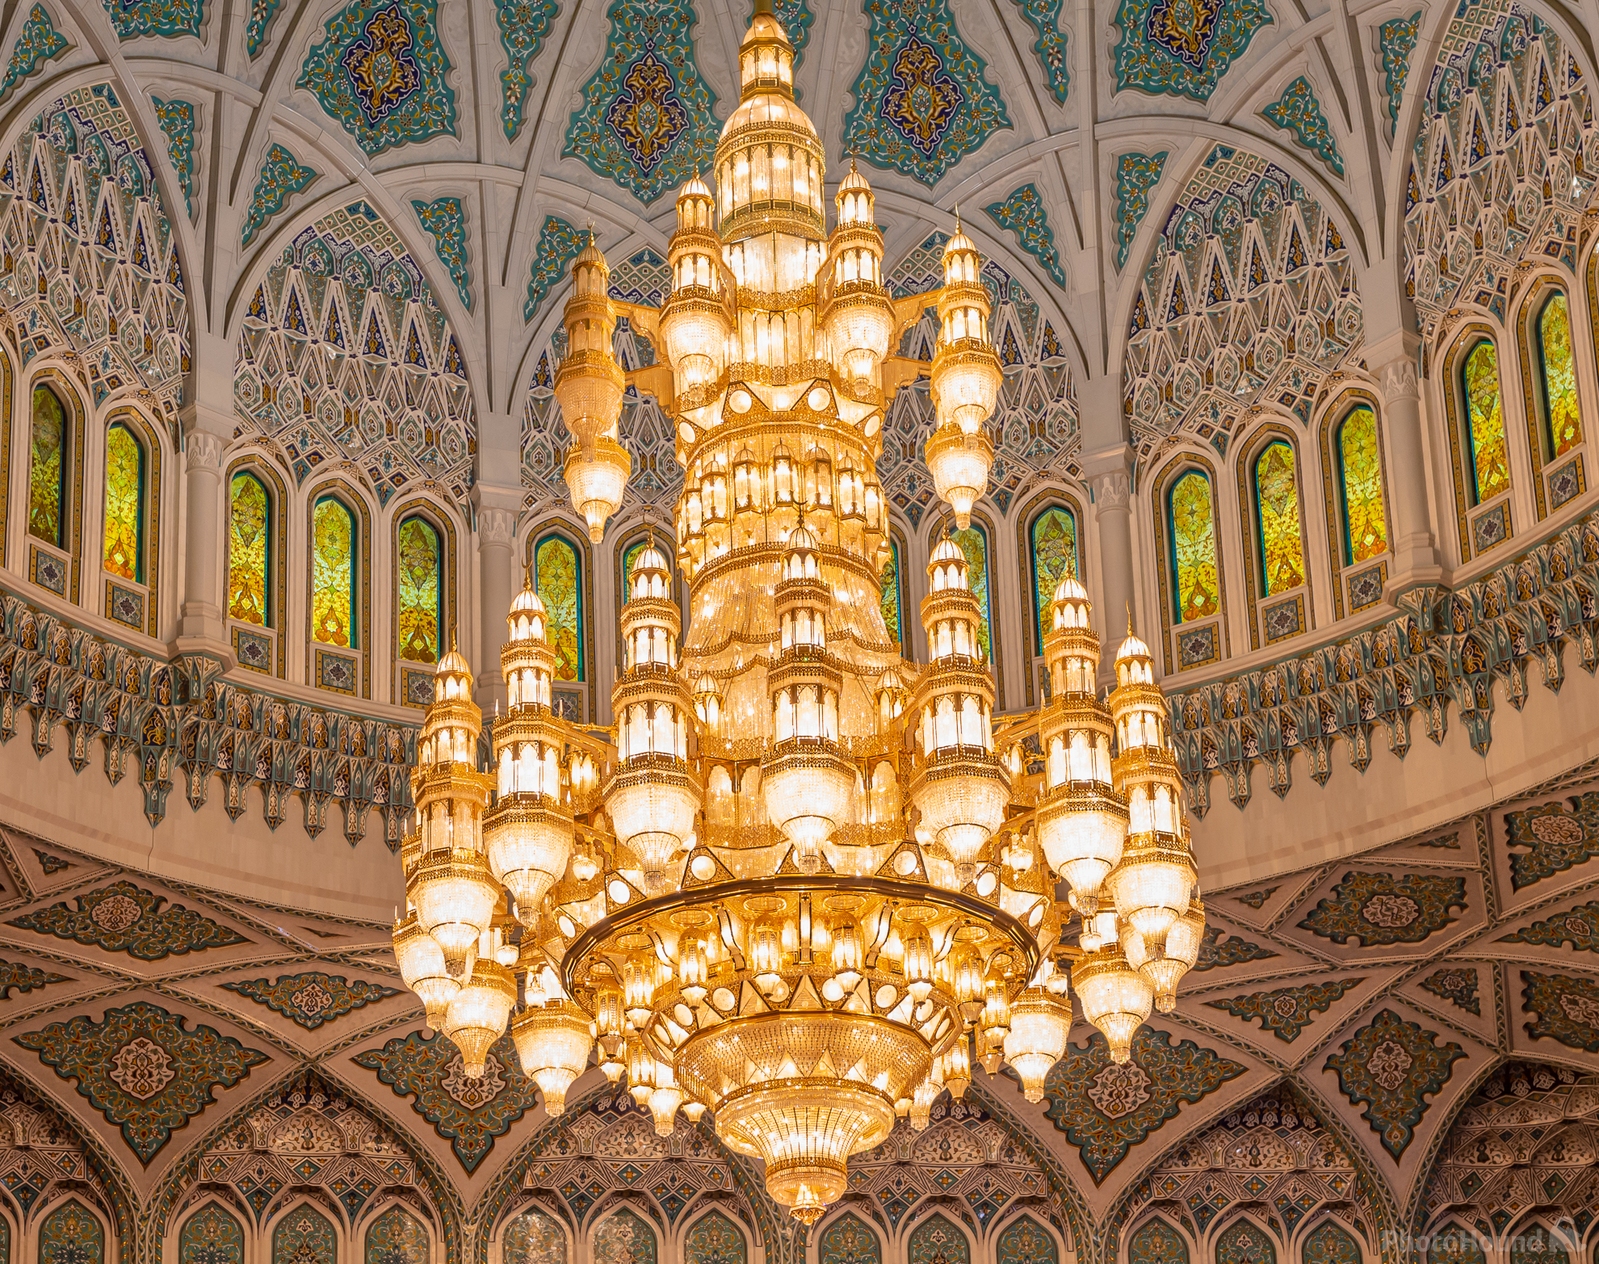 Image of Sultan Qaboos Grand Mosque, Muscat by Sue Wolfe